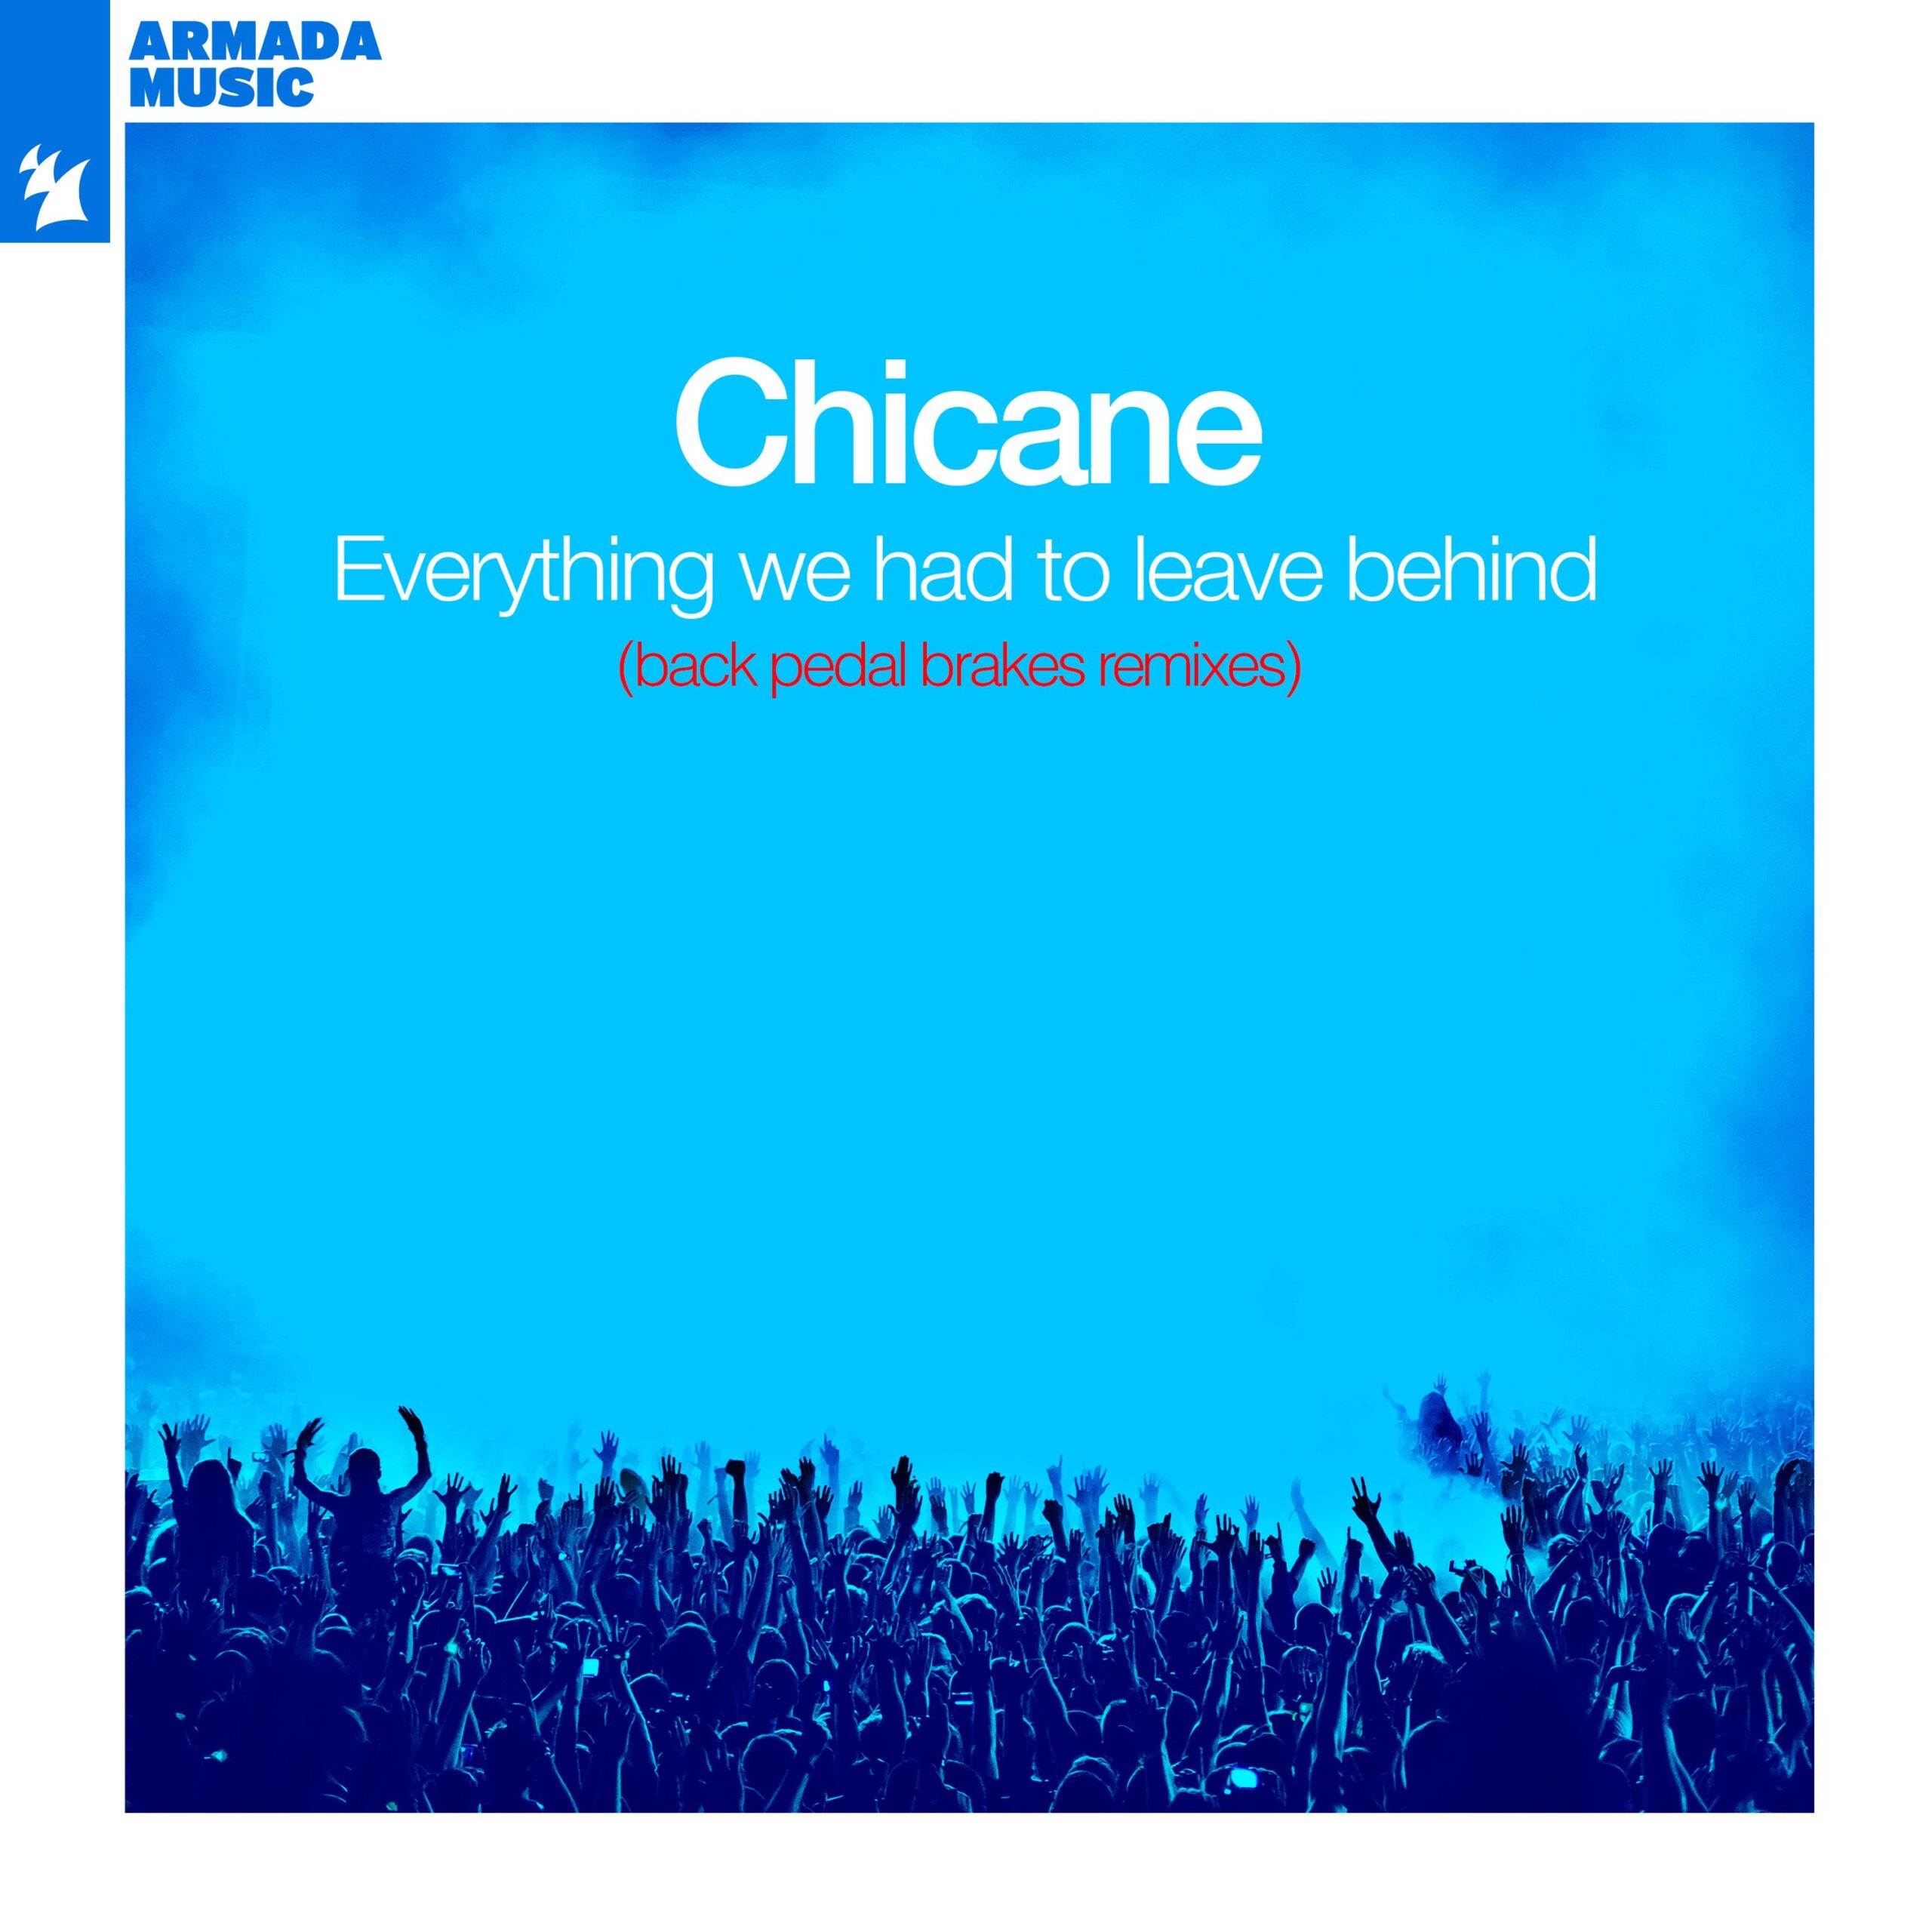 Chicane presents Everything We Had To Leave Behind (Back Pedal Brakes Remix) on Armada Music